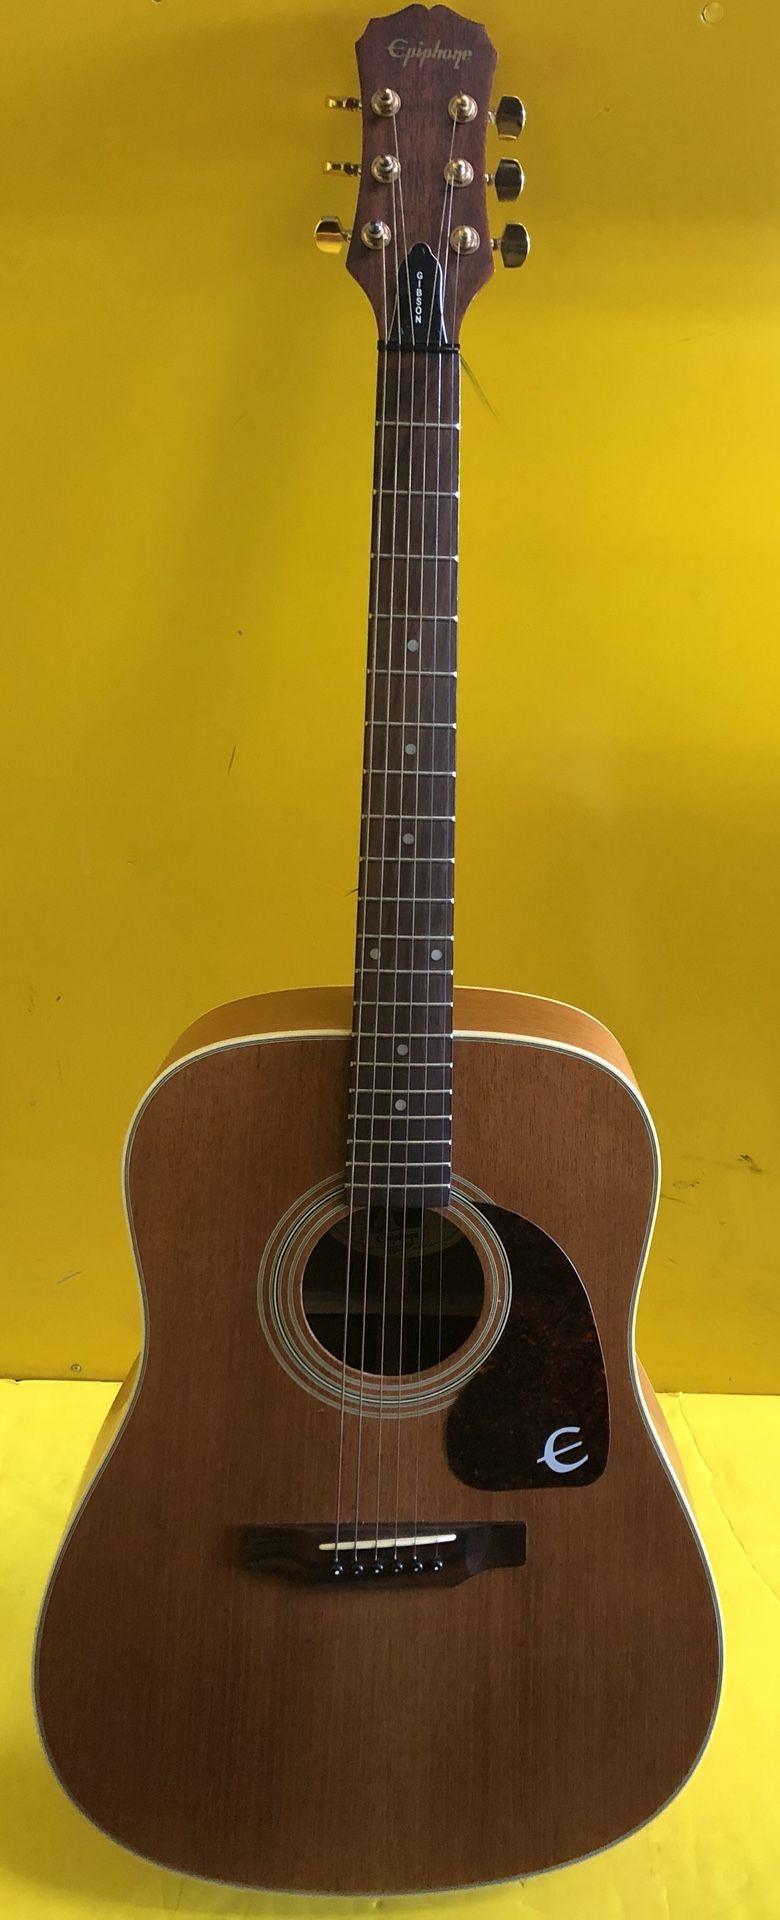 Gibson Epiphone PR 350 NS Acoustic Guitar W a Nice Case - LIKE NEW CONDITION